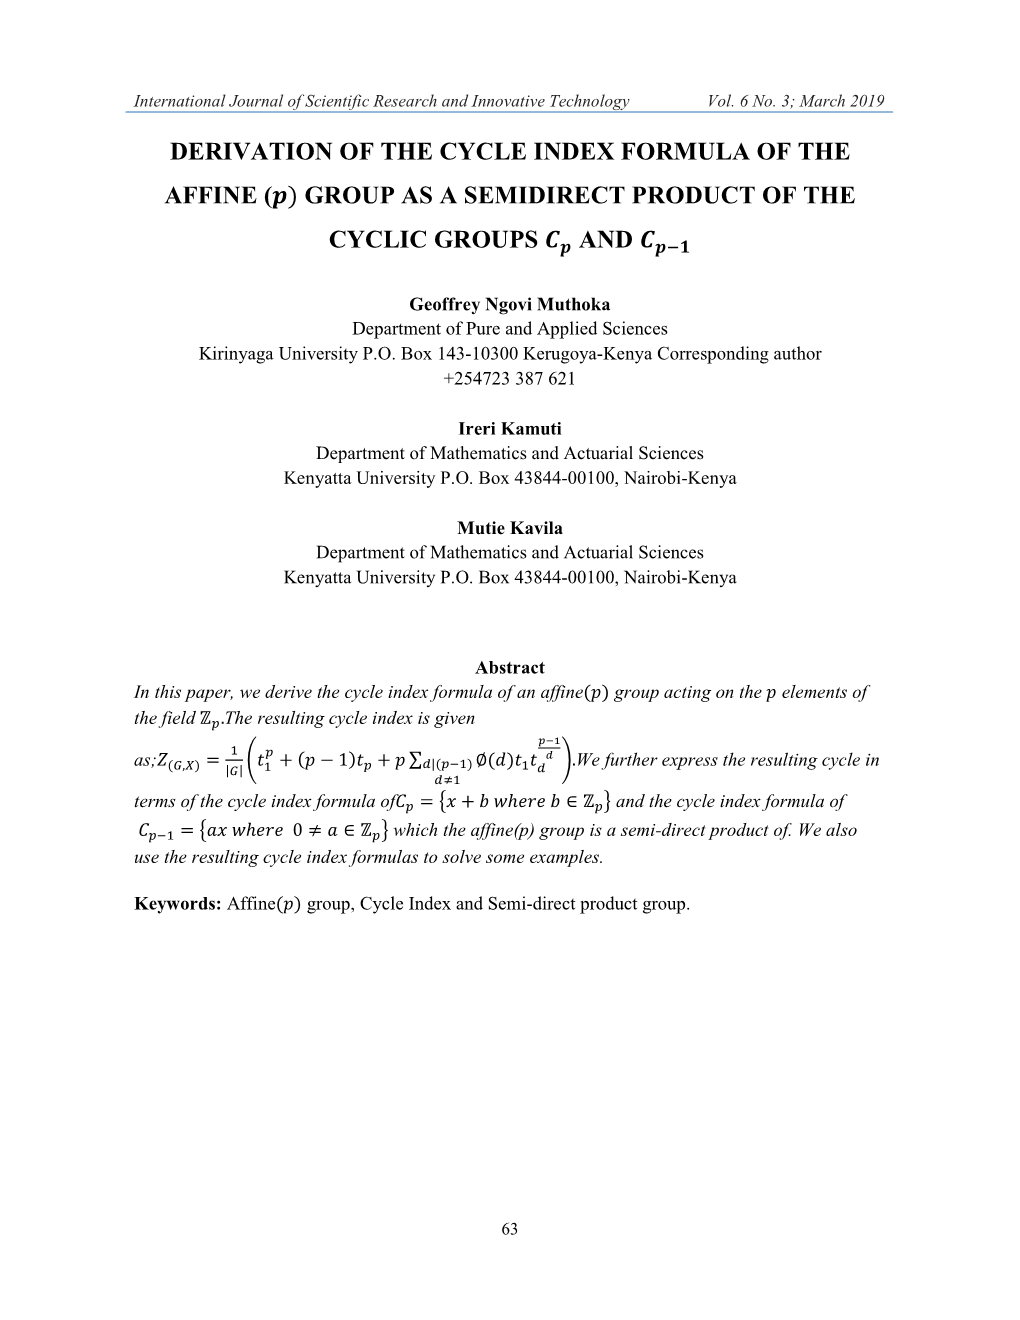 Derivation of the Cycle Index Formula of the Affine ( ) Group As a Semidirect